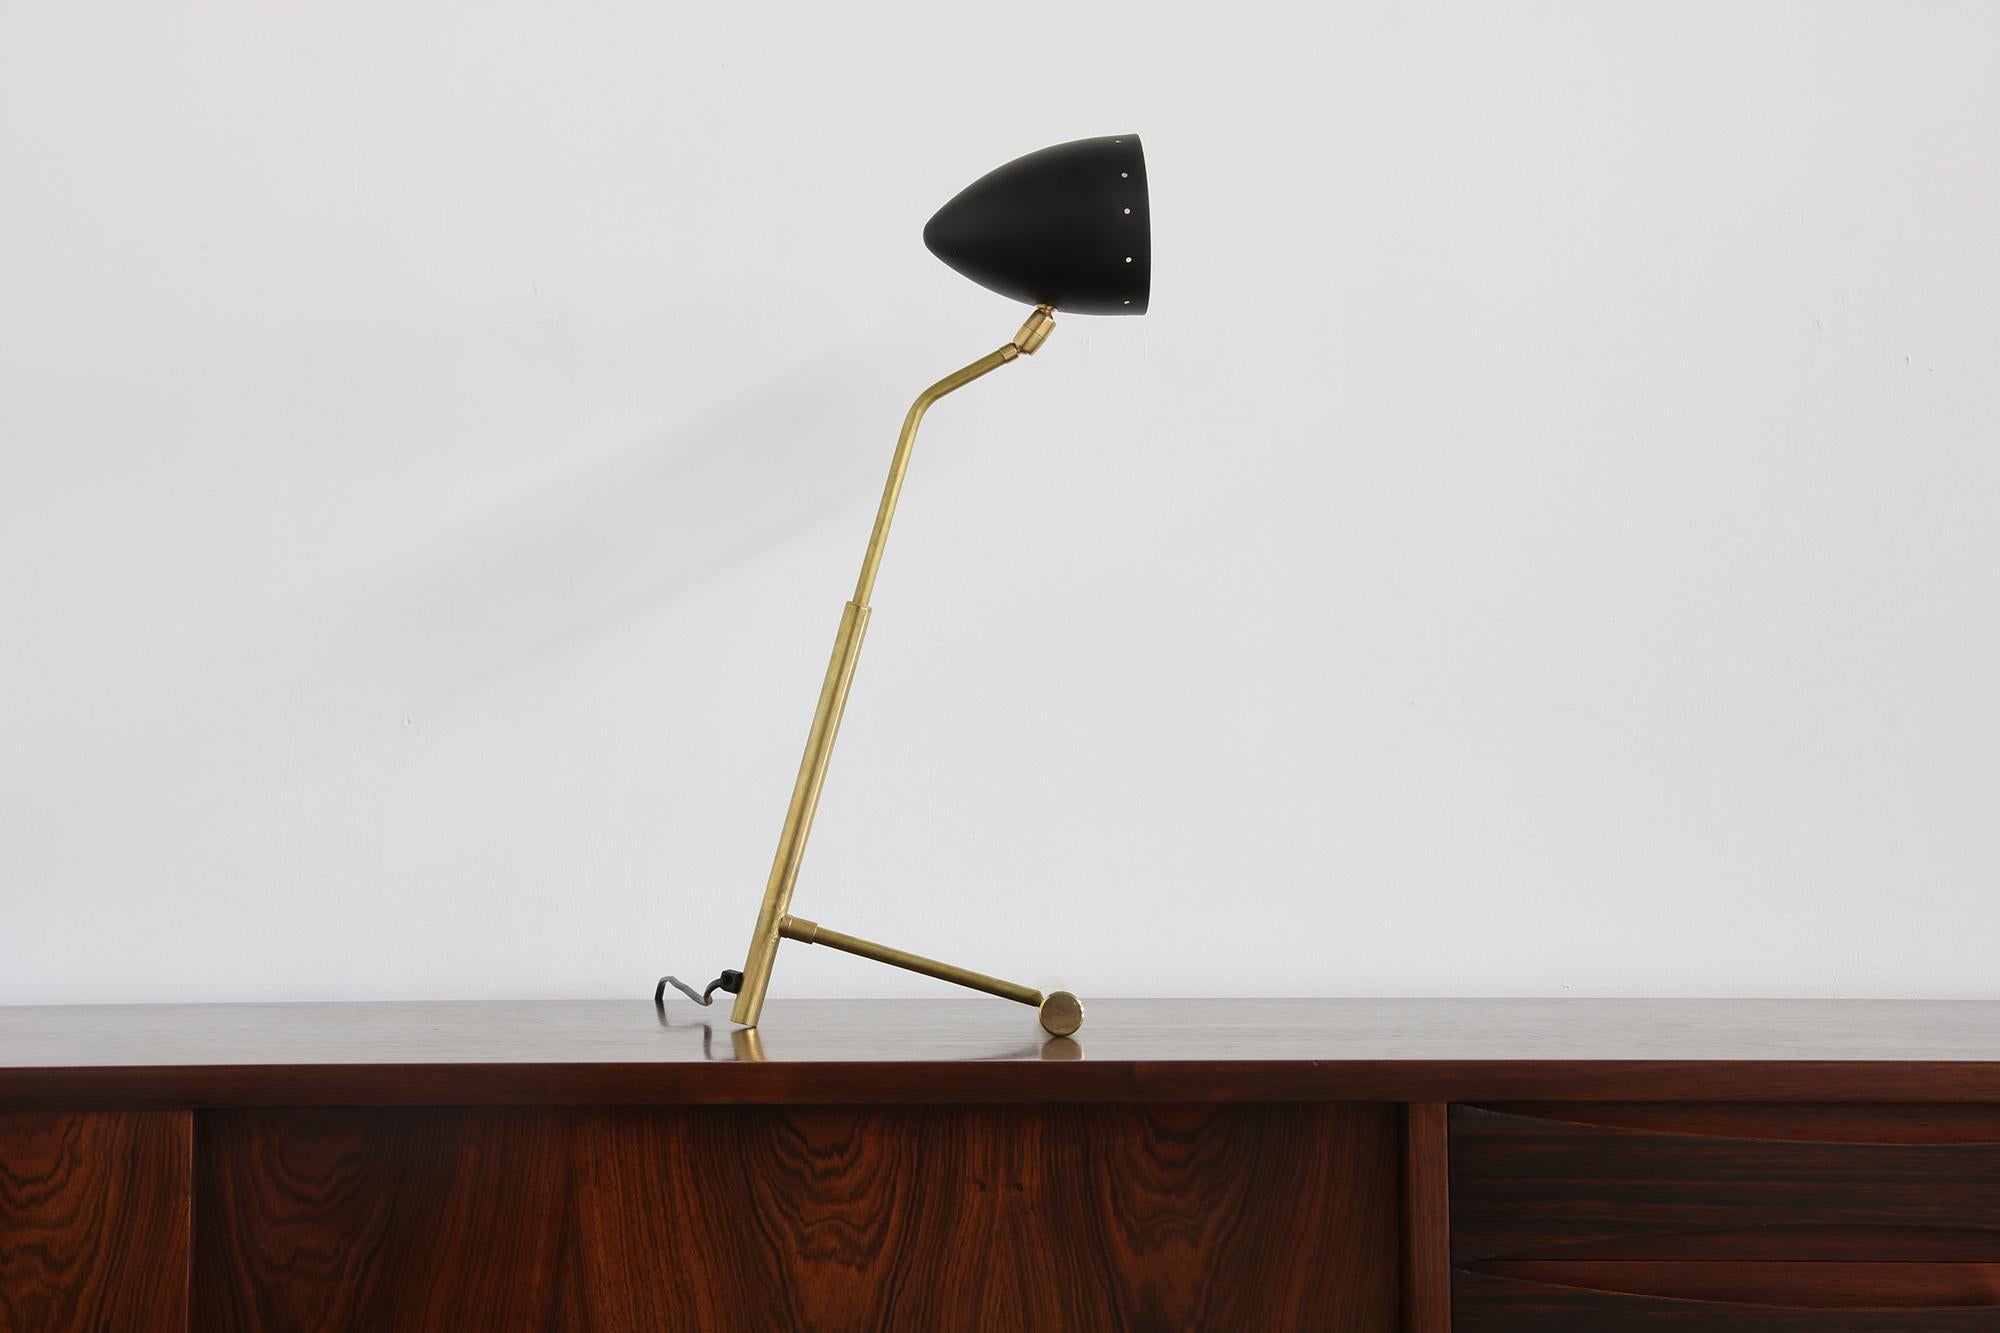 Beautiful Modern Italian table lamp in midcentury style.
Works in the US and Asia as well, of course in Europe also.
Adjustable lampshade, up to 60W
Several available
Also available with a white or red lampshade.